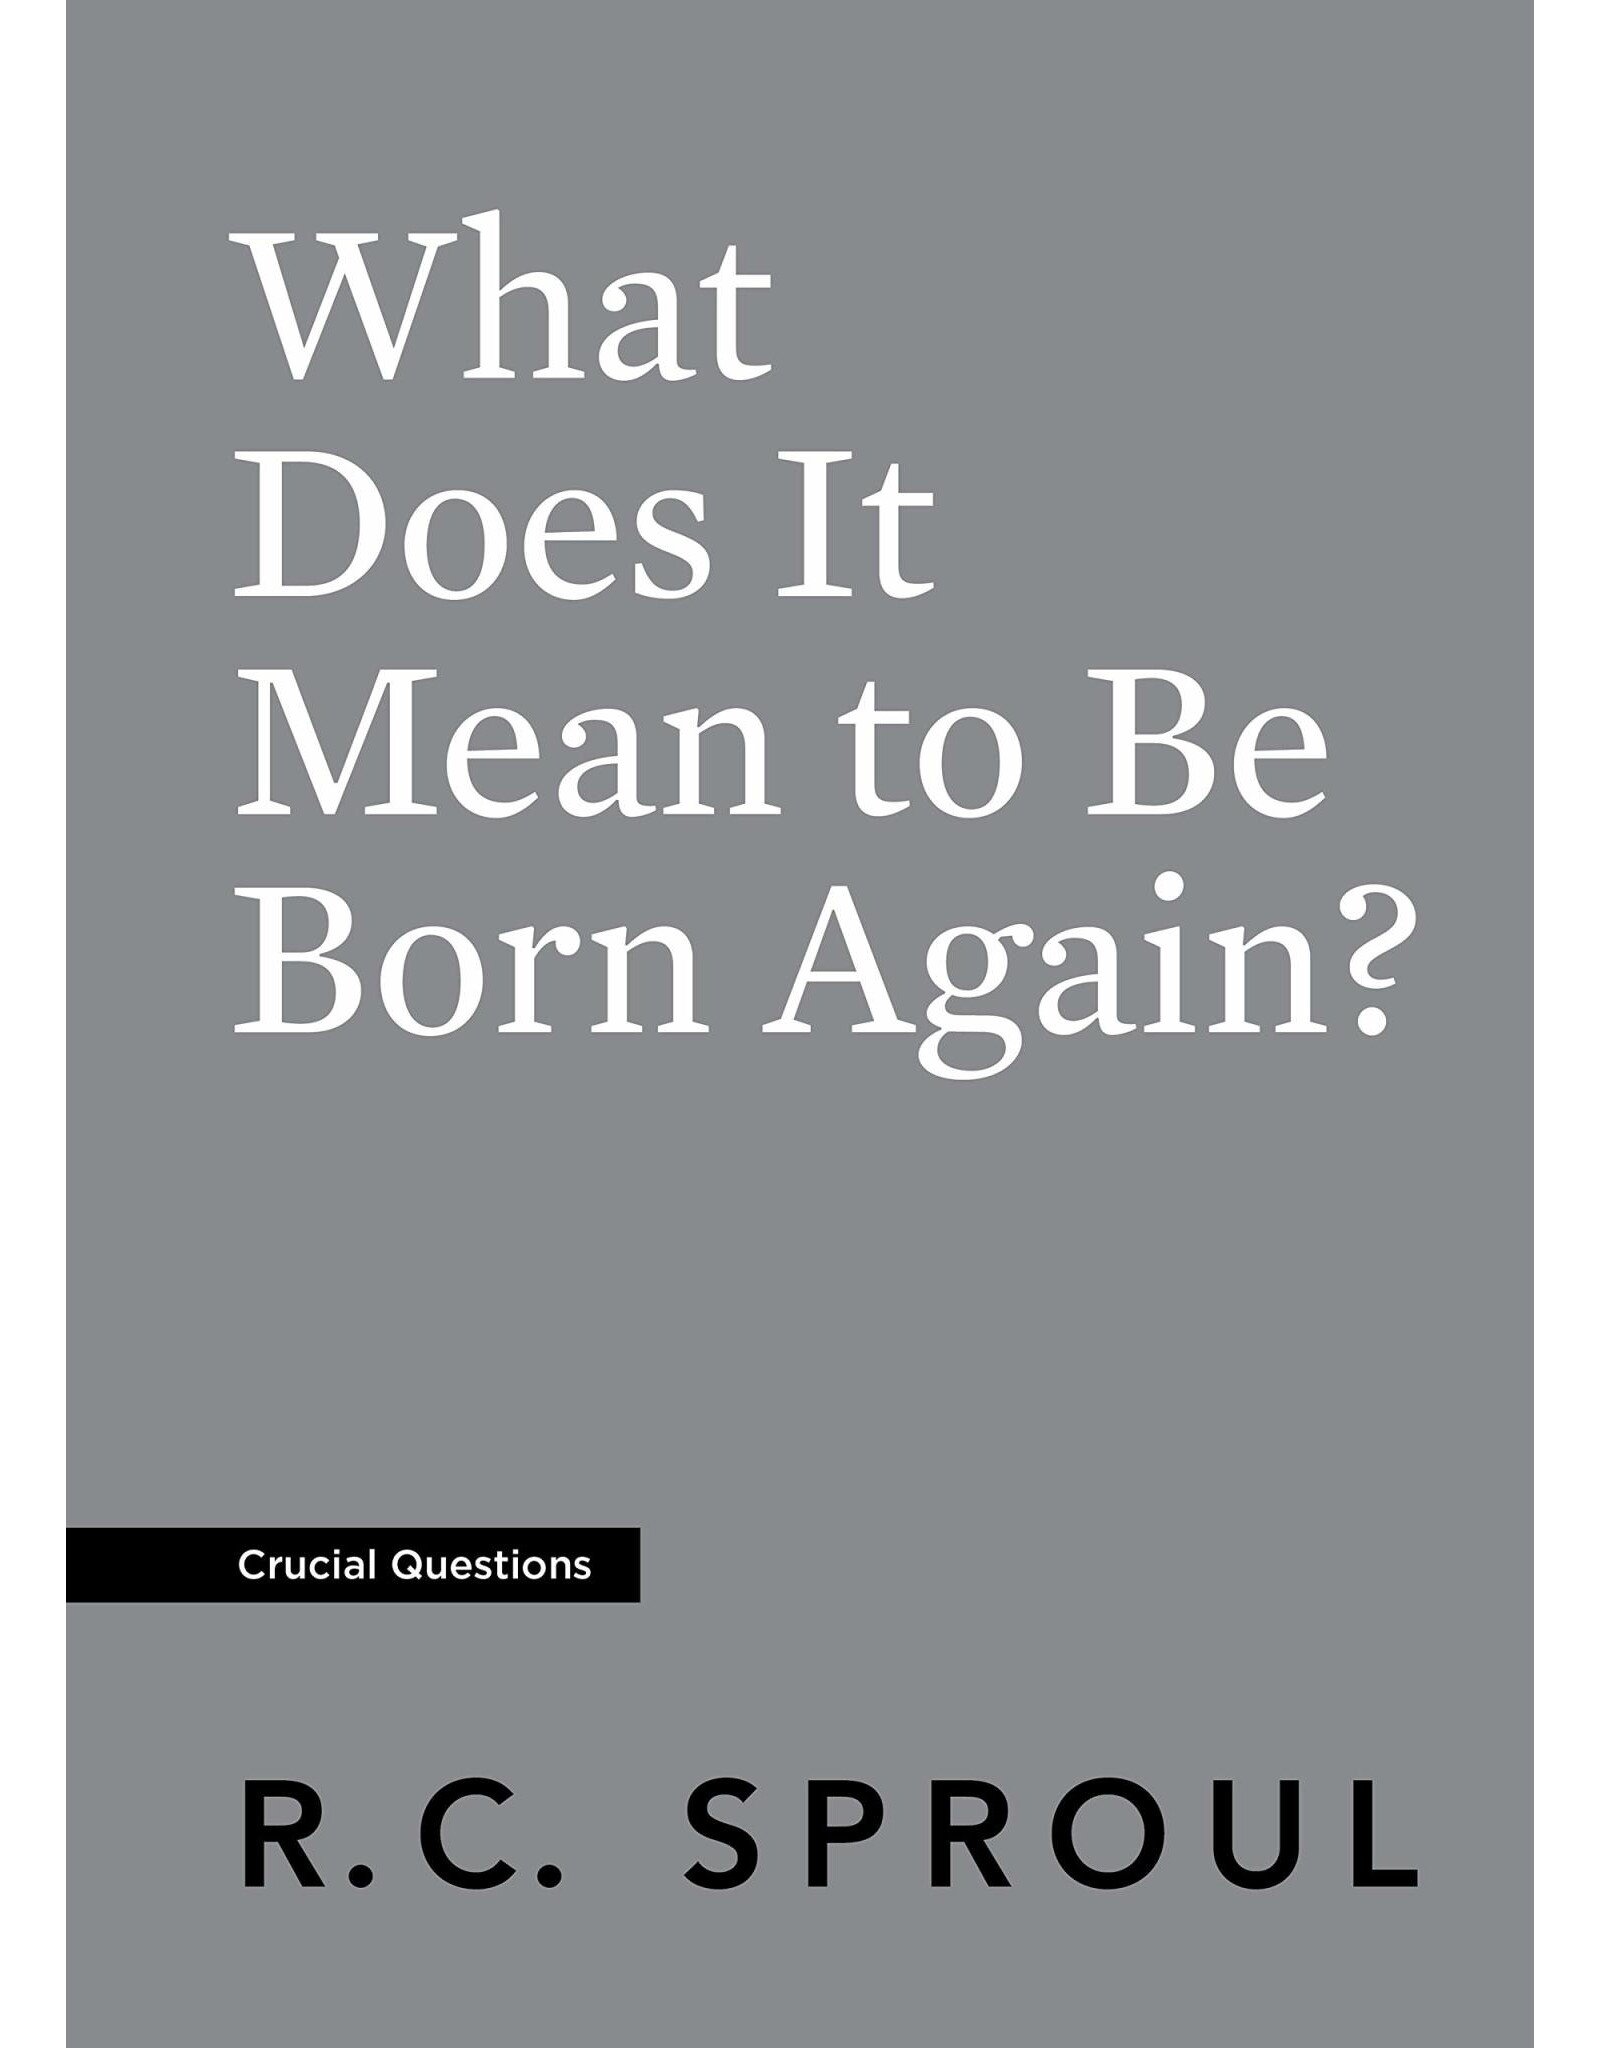 Ligonier / Reformation Trust What Does It Mean to Be Born Again? (Crucial Questions)